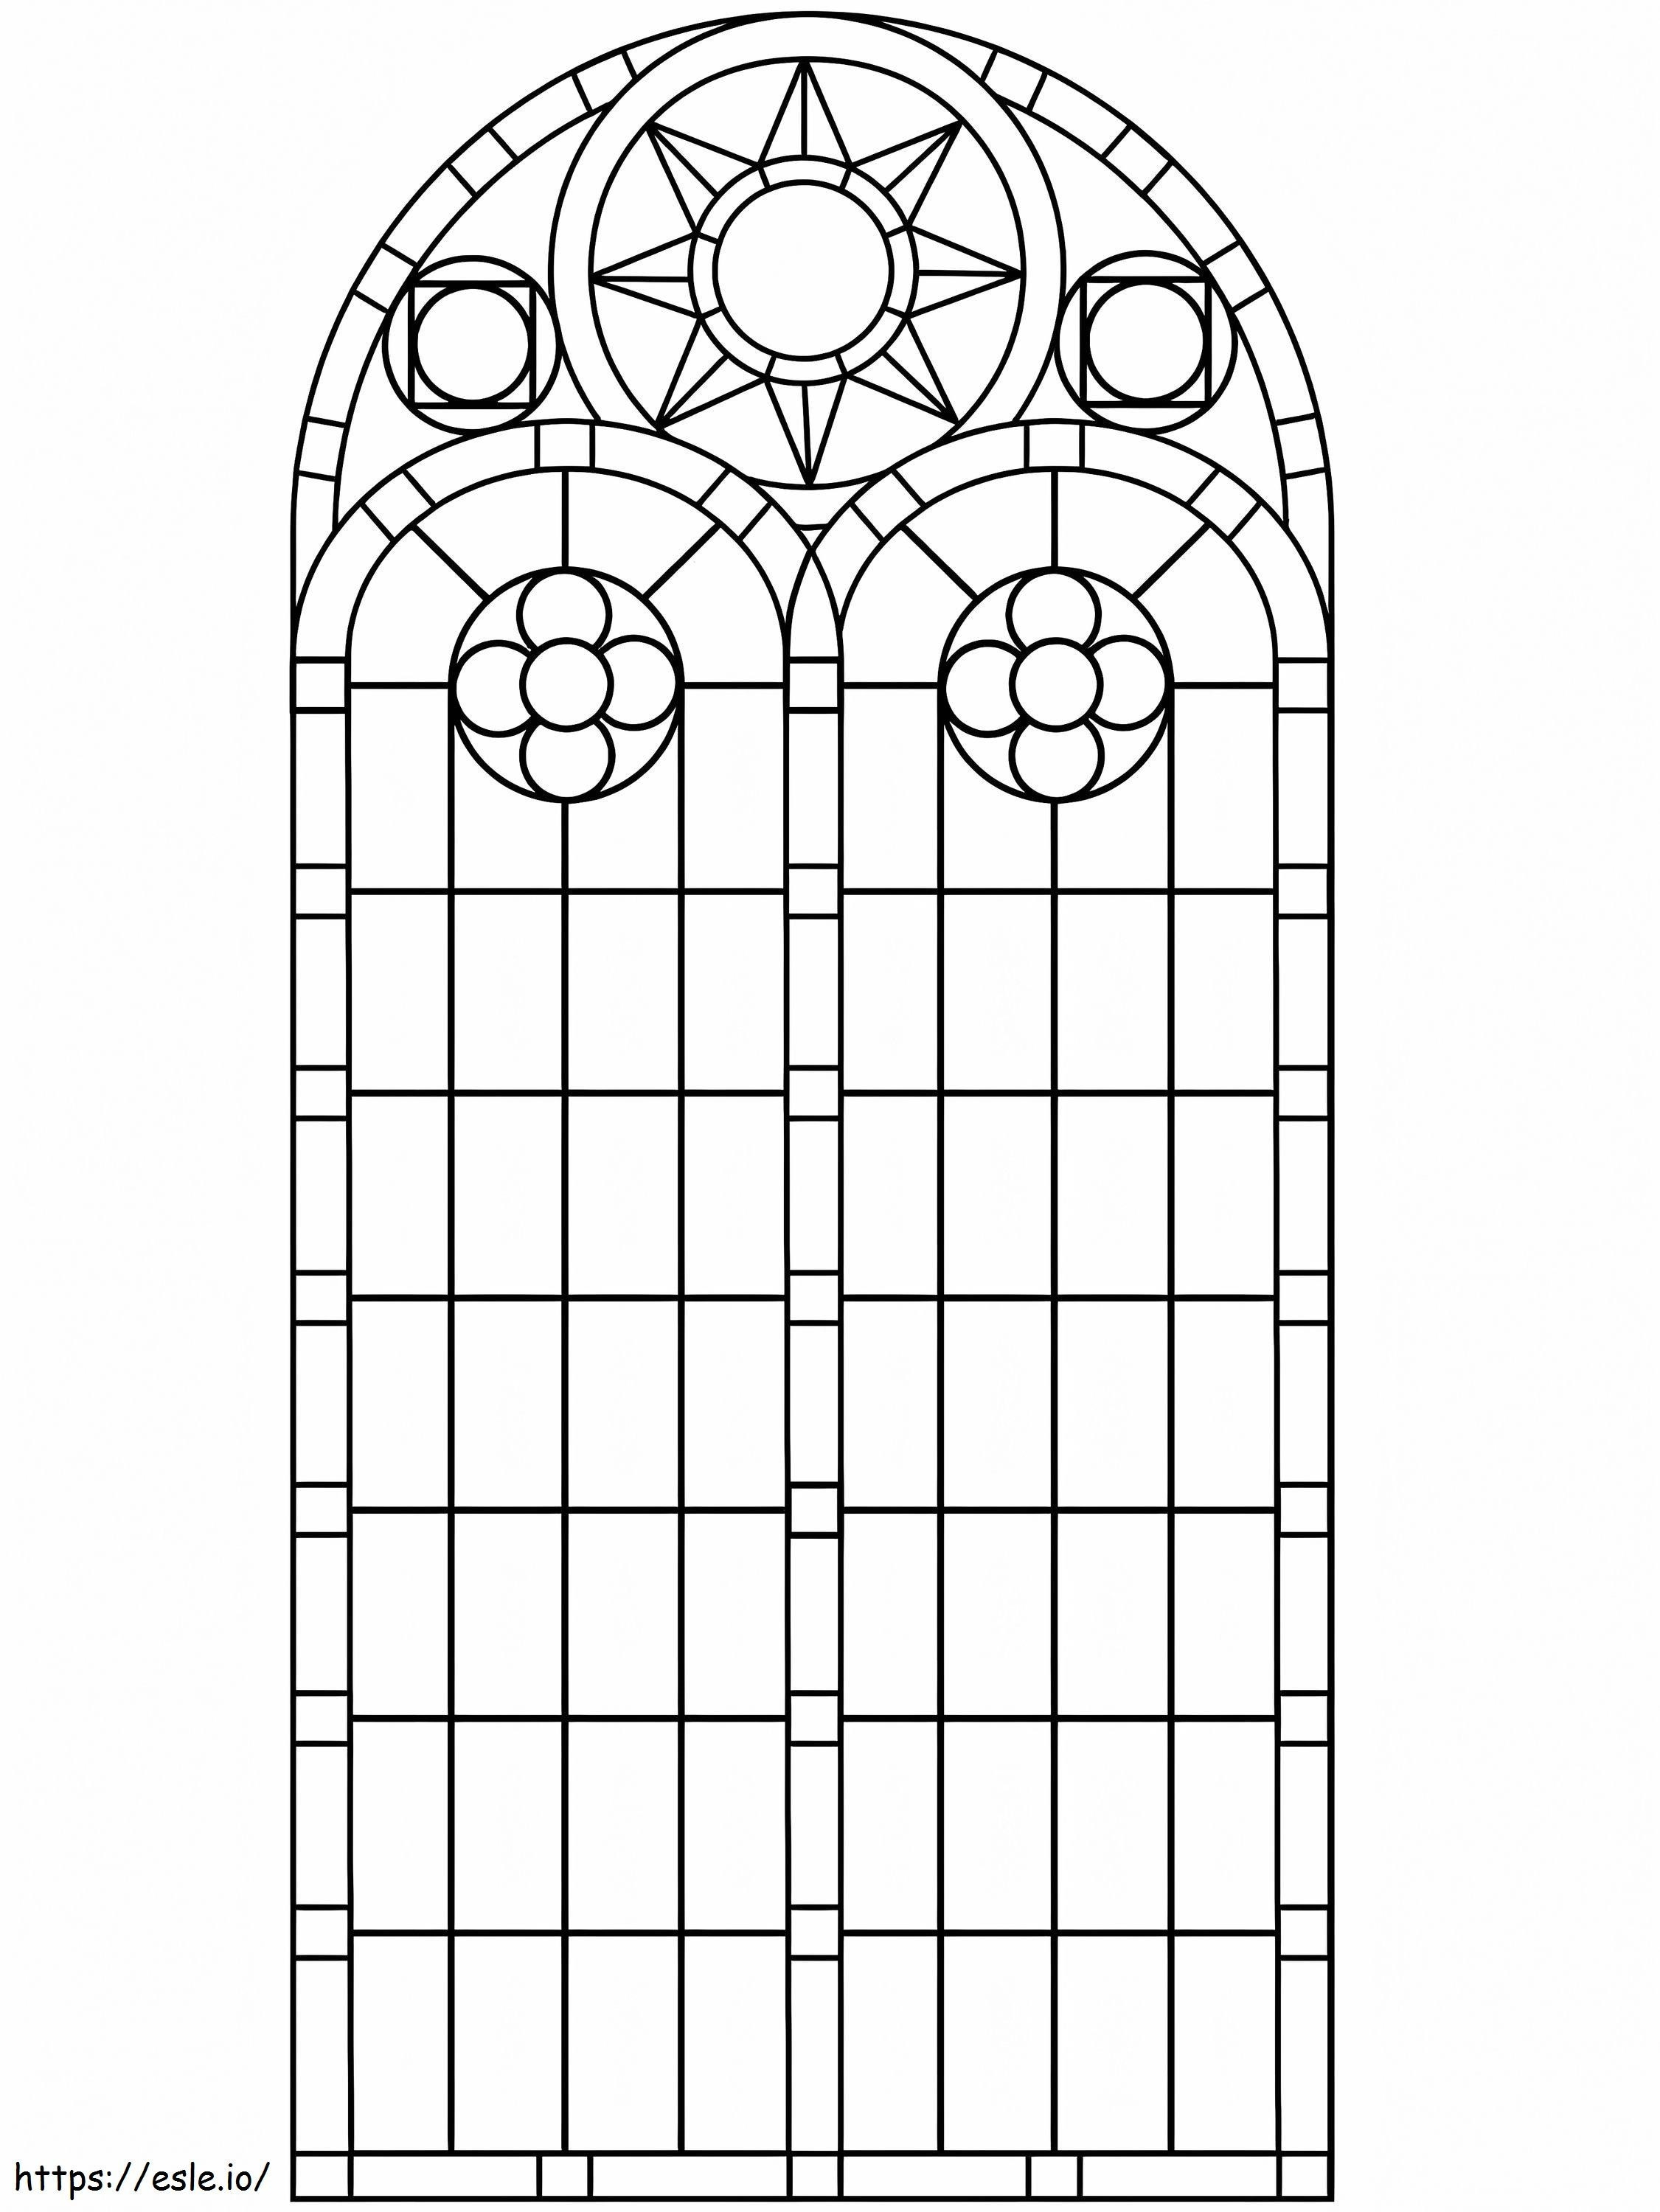 Stained Glass 1 coloring page